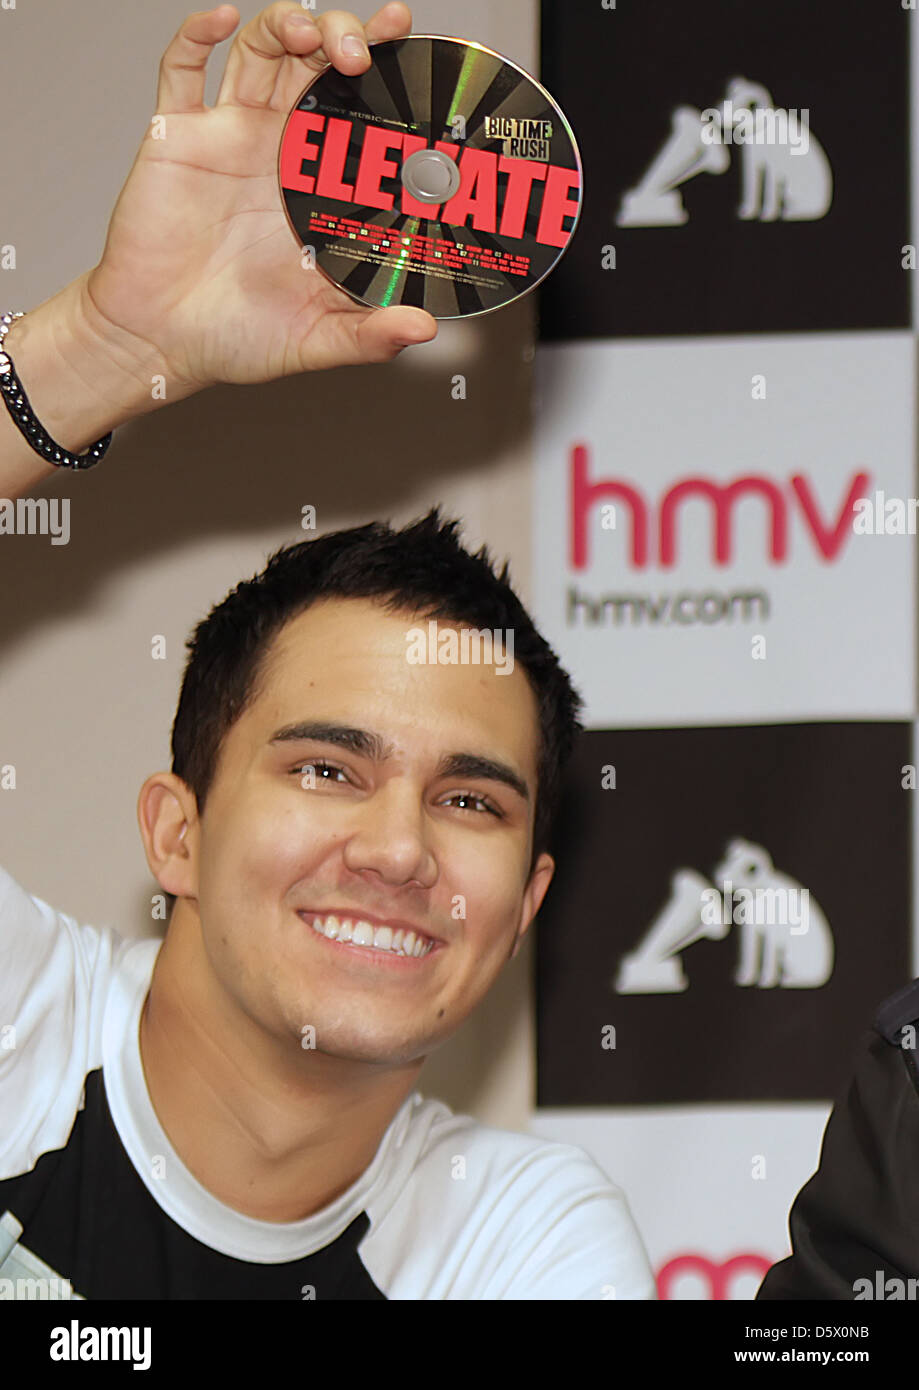 Carlos Pena Big Time Rush Meets Fans and Sign Copies of Their New Album 'Elevate' Manchester UK Stock Photo